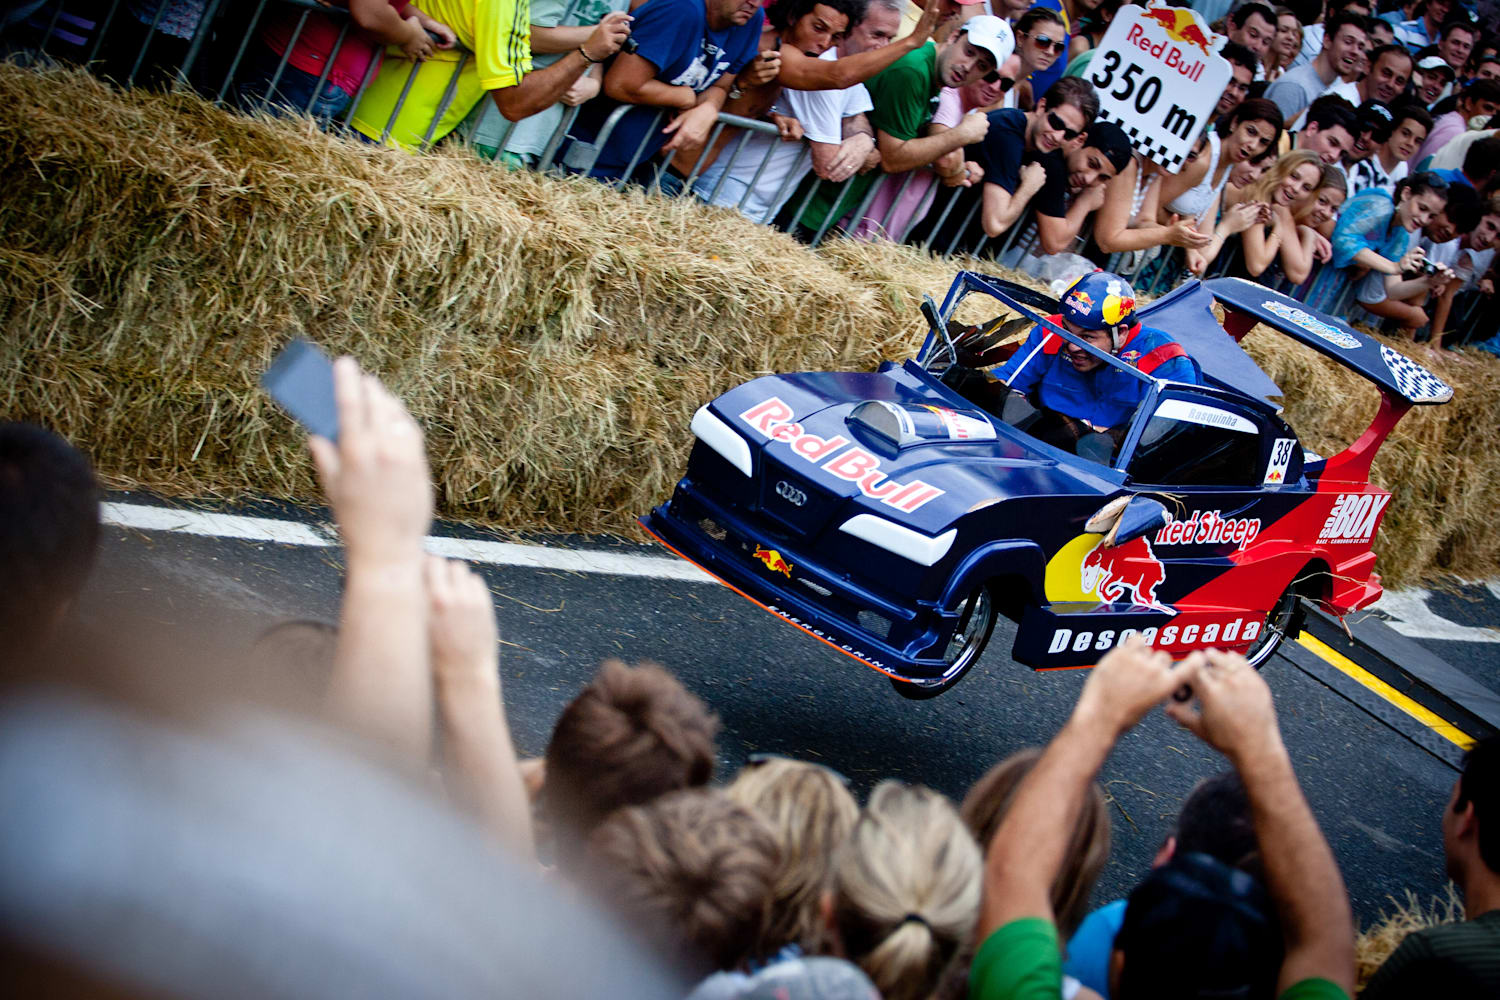 Red Bull Soapbox Race See races from around the world